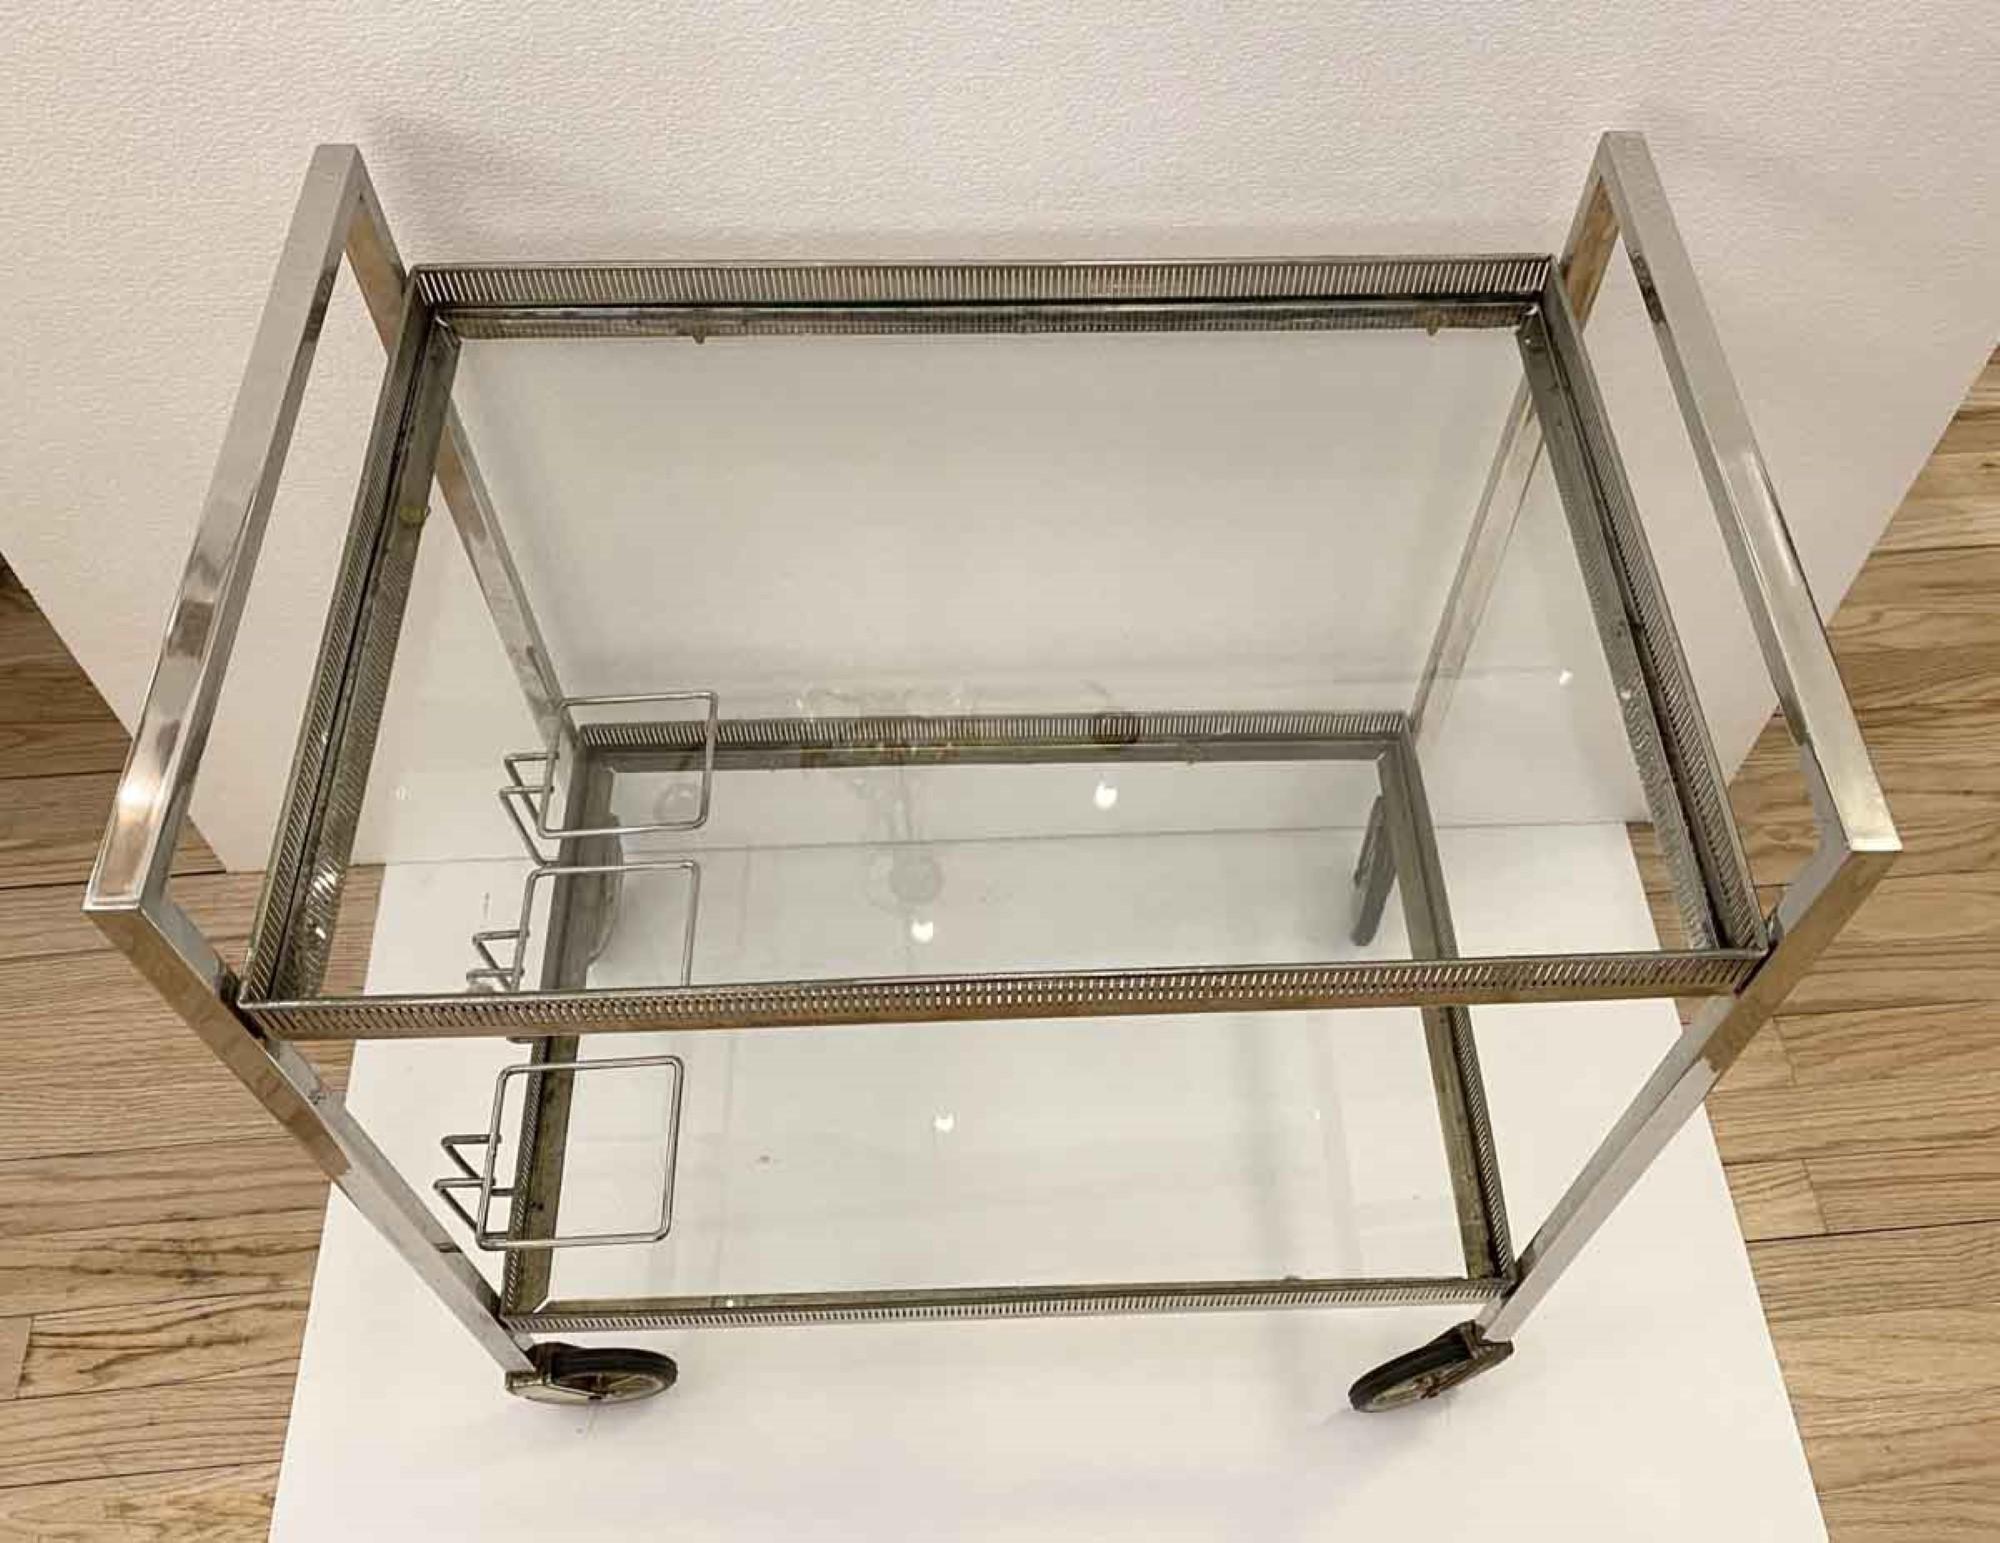 Brass 1990s Mid-Century Modern Bar Cart from Belgium, Nickel-Plated with Glass Shelves